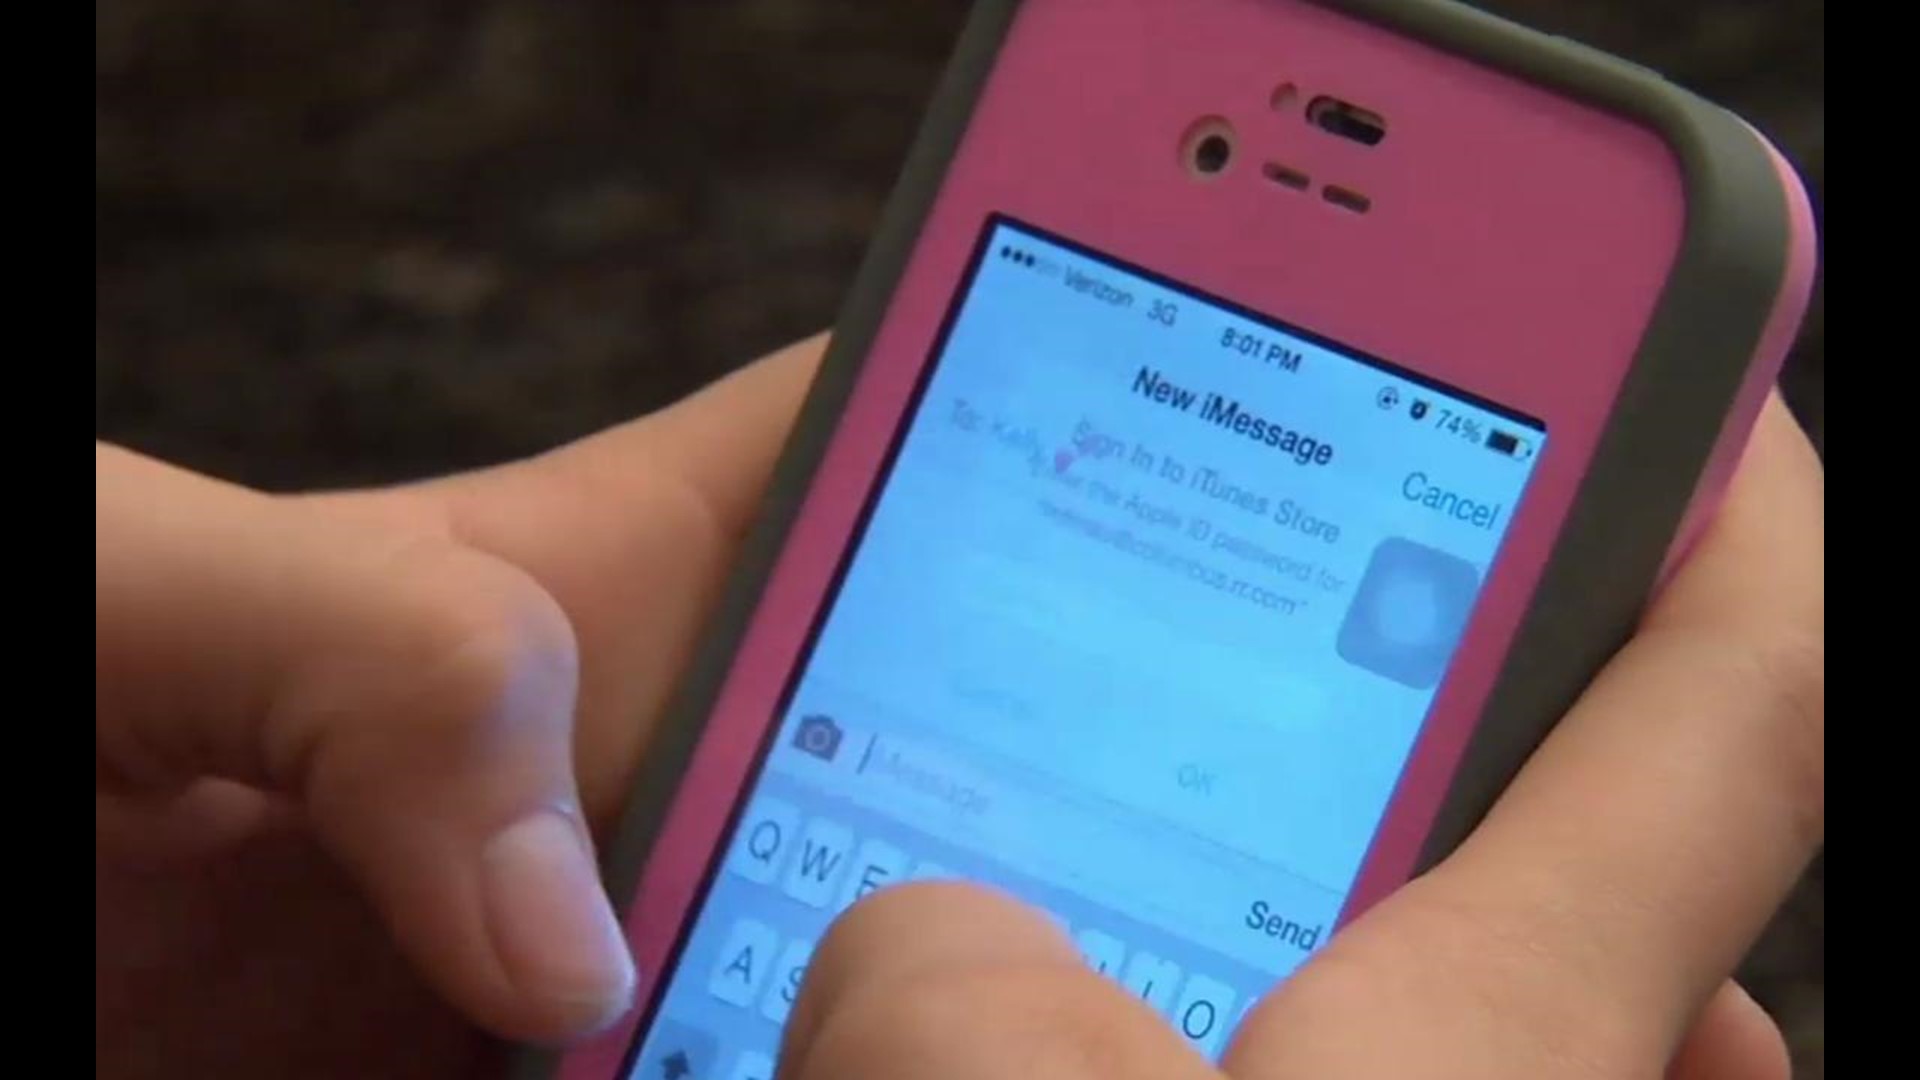 Parents Warned Of Ways Teens Hide Cell Phone Activity